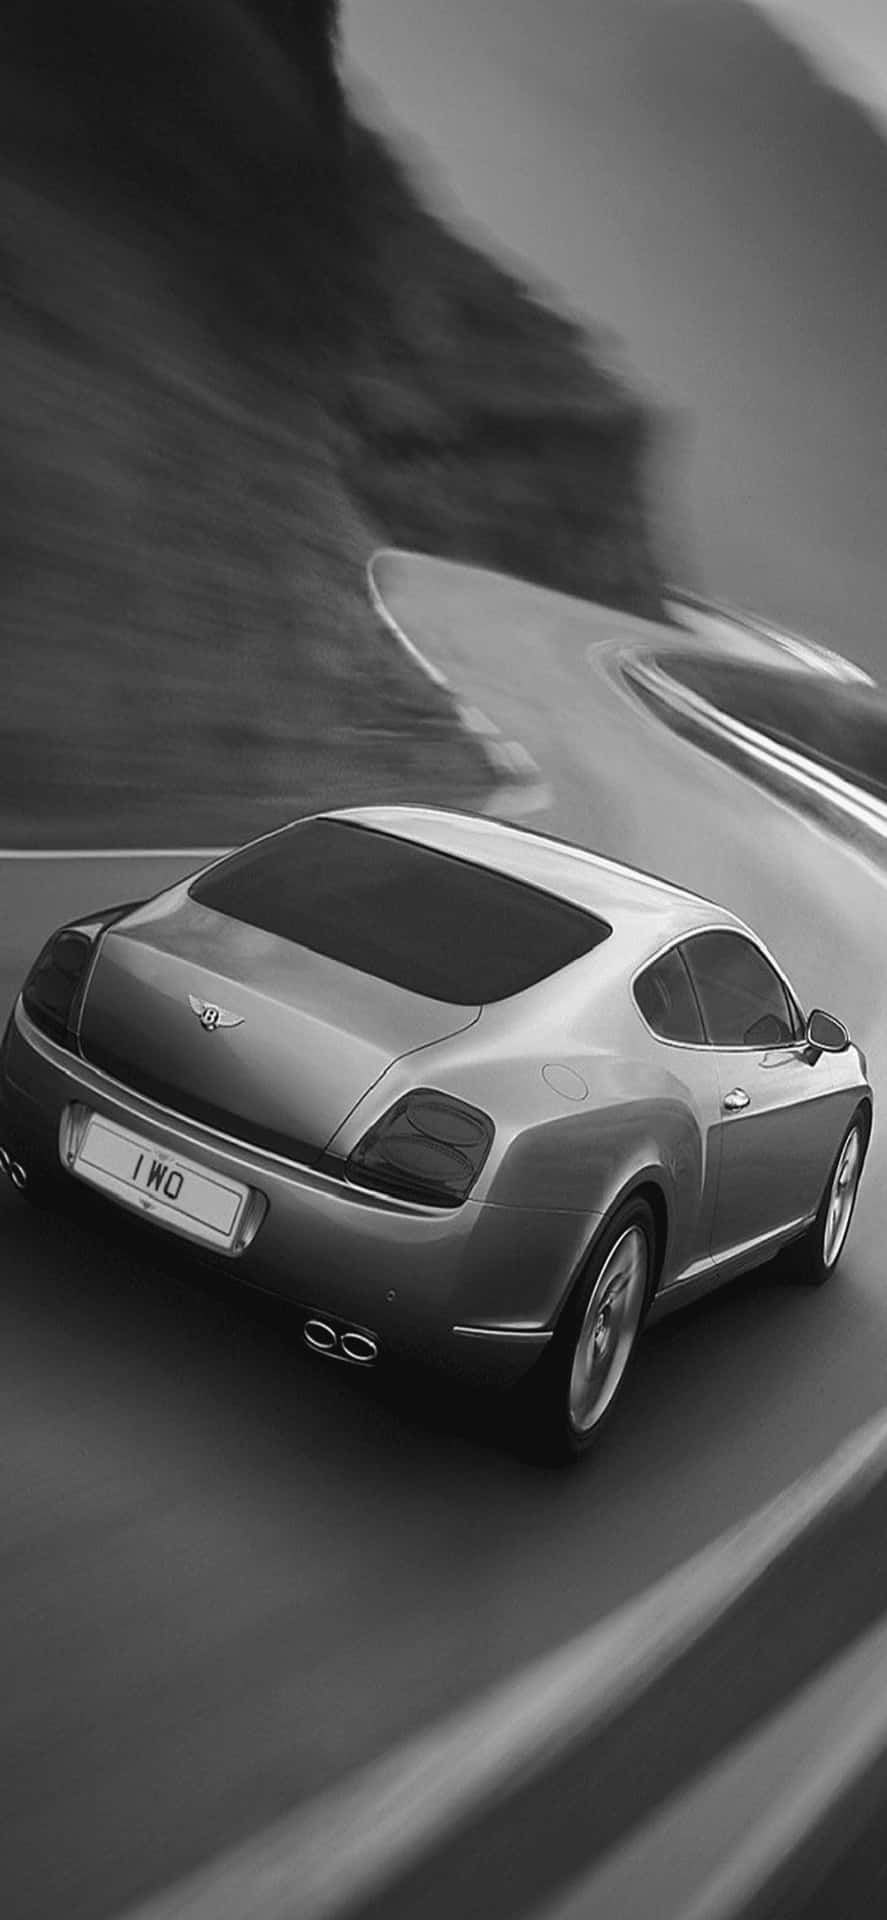 Get behind the wheel and experience superior luxury with the Iphone Xs Max Bentley